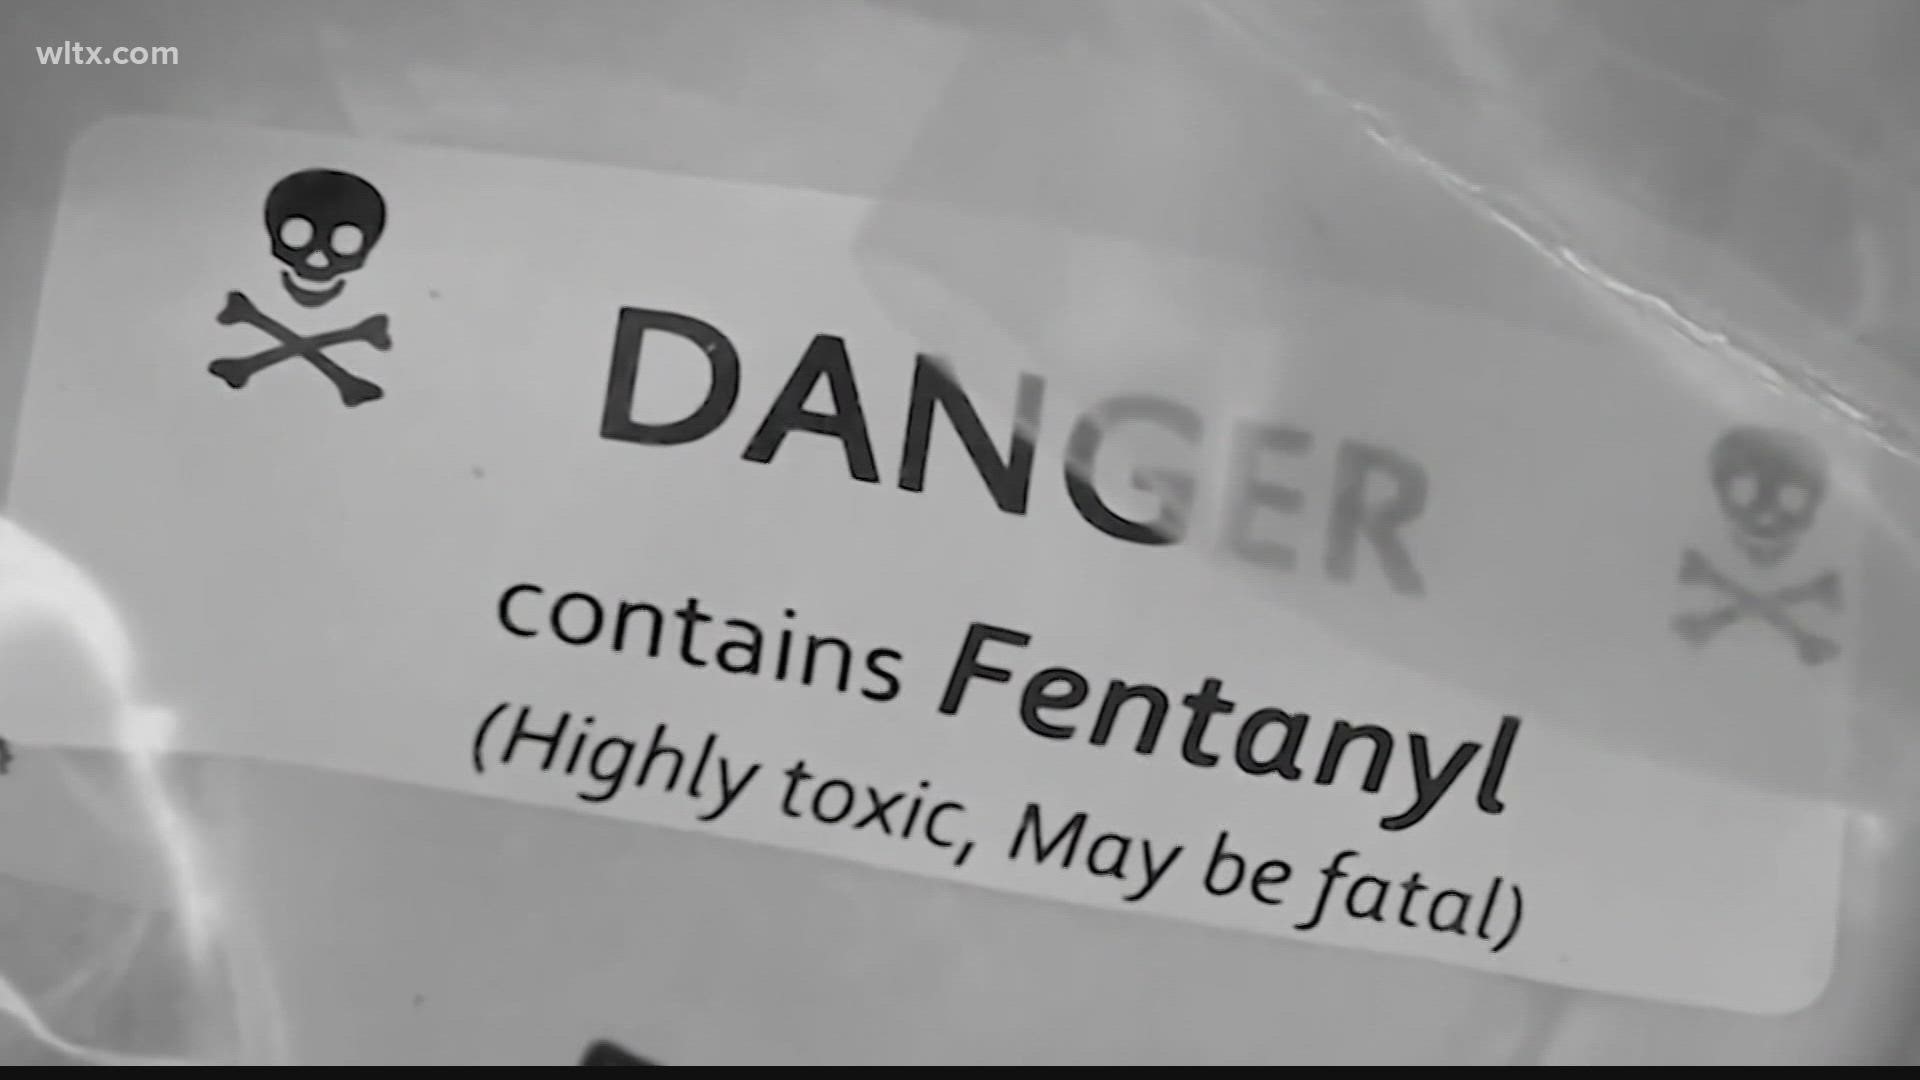 Members of the House and Senate agree legislation concerning fentanyl is high on the list of priorities to criminalize.